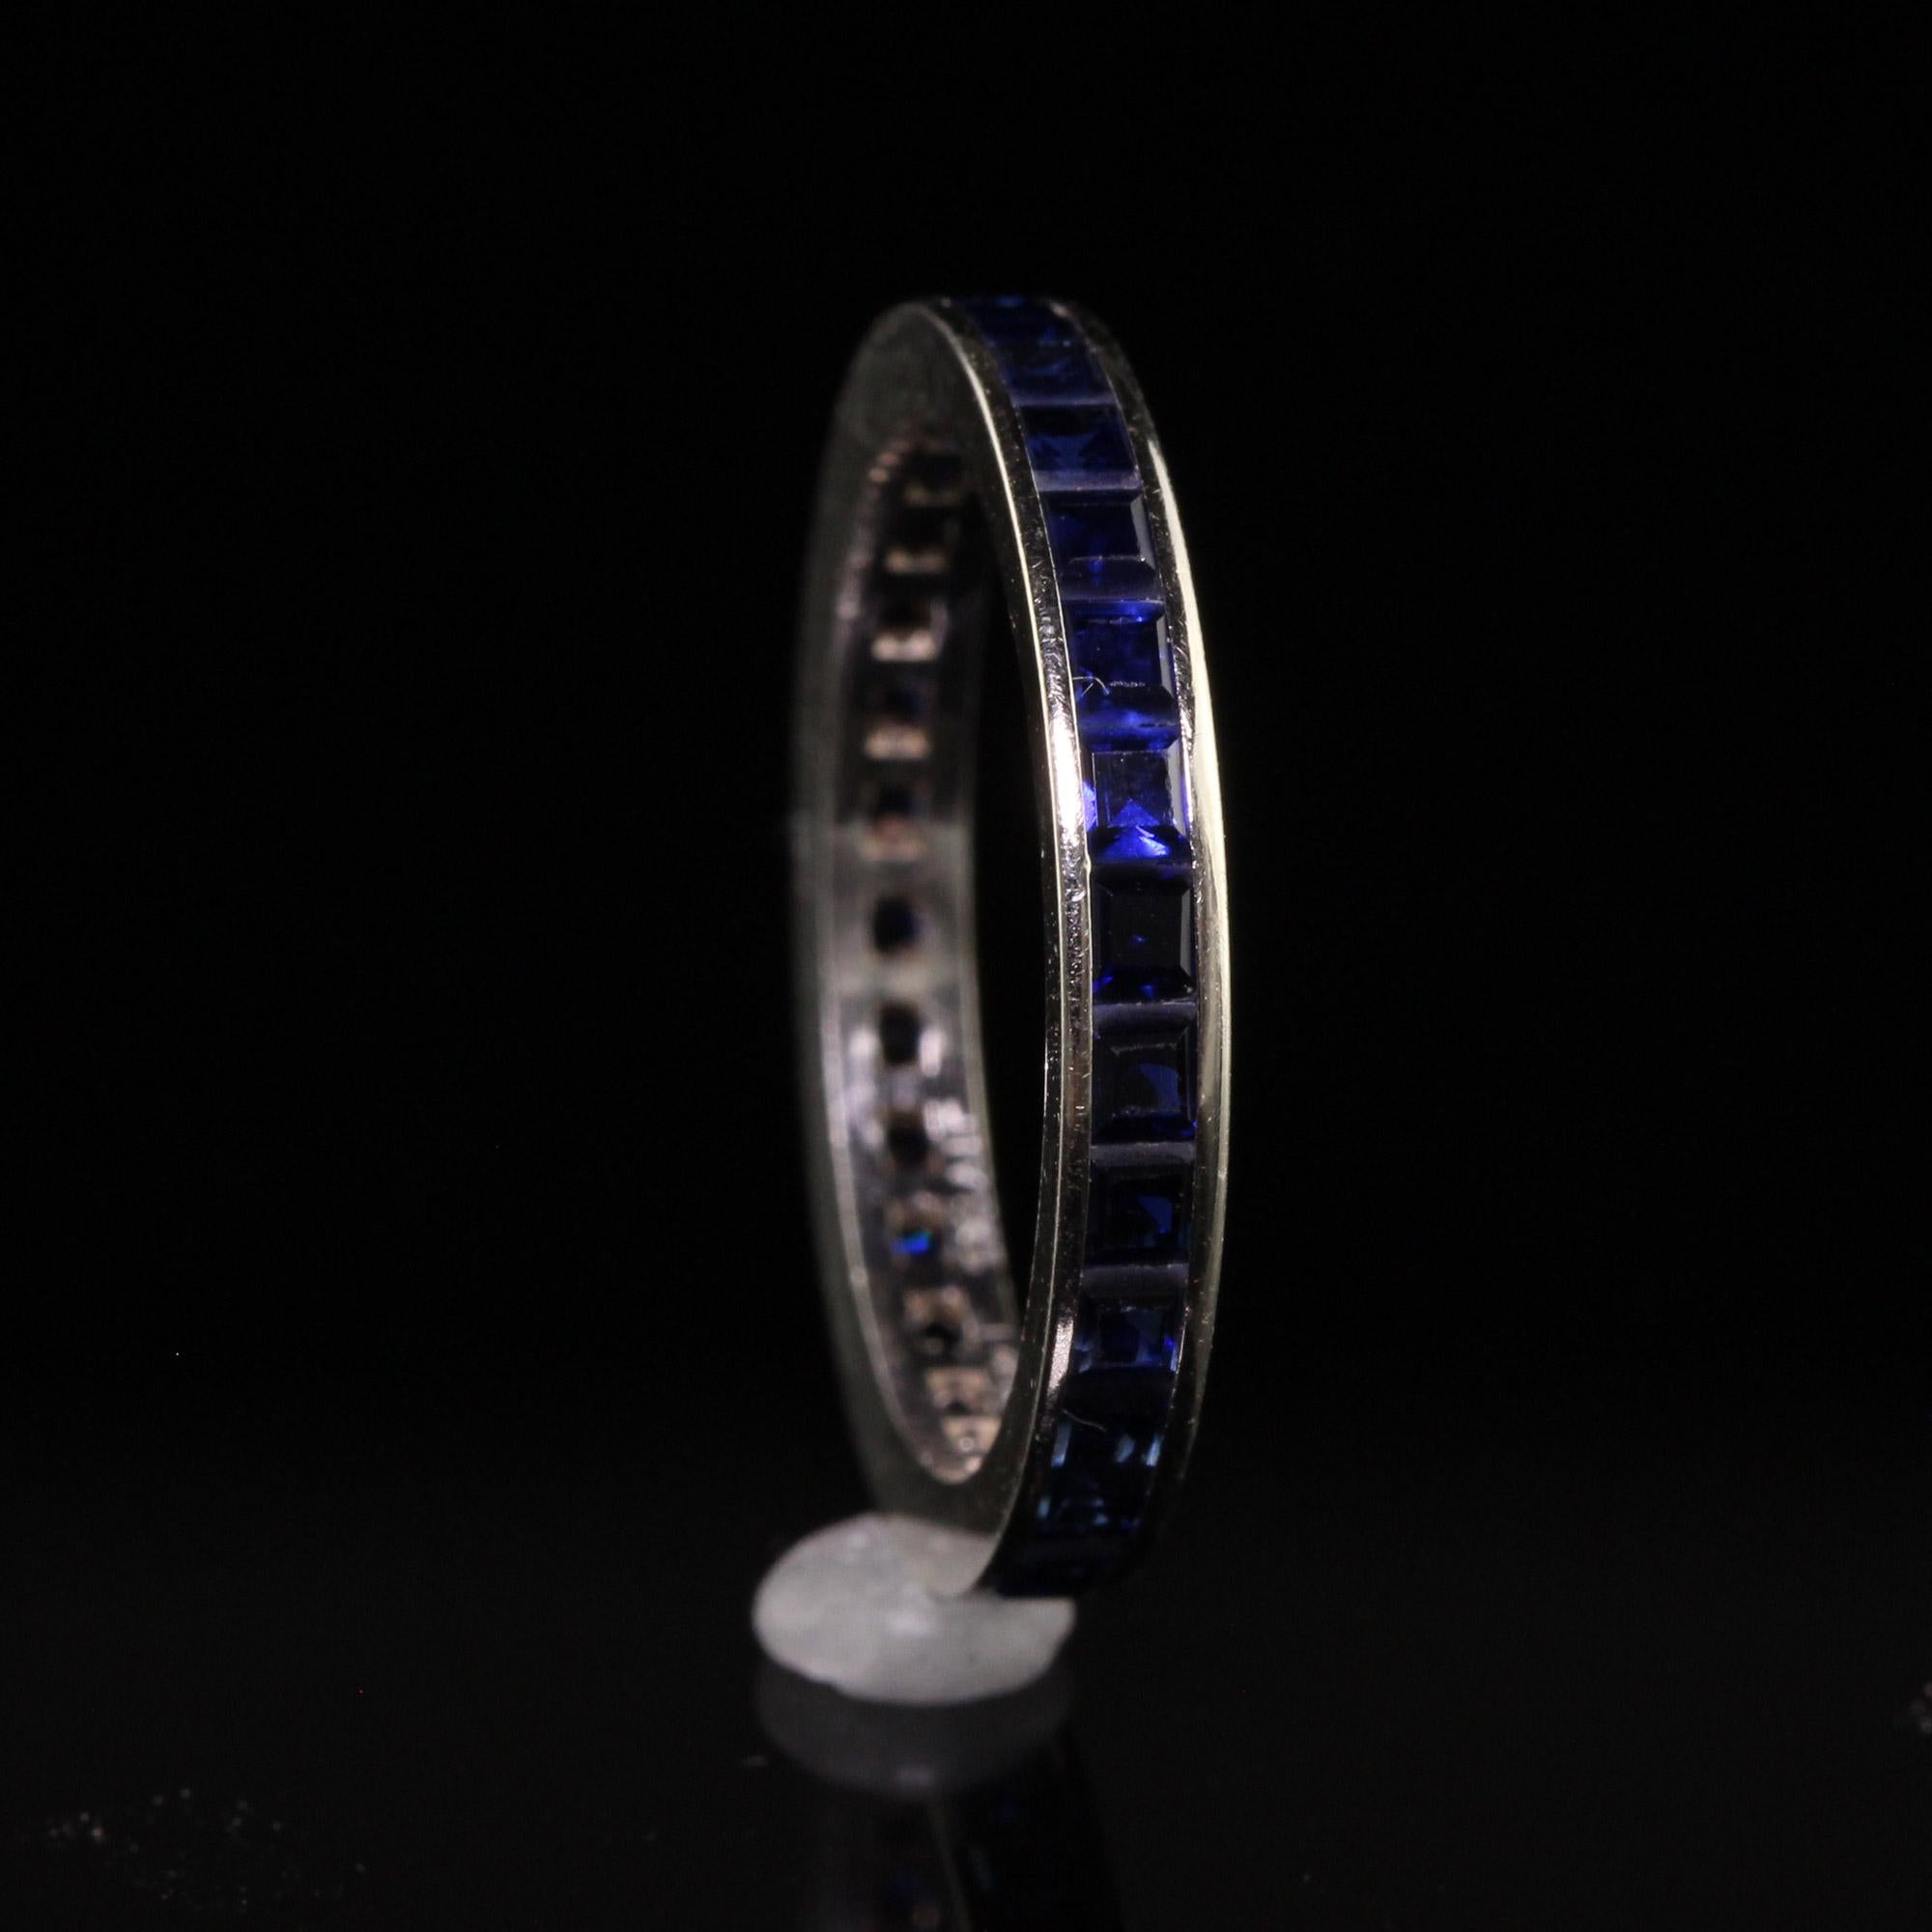 Vintage Retro 14K White Gold Square Cut Sapphire Eternity Band - Size 5 1/2 In Good Condition For Sale In Great Neck, NY